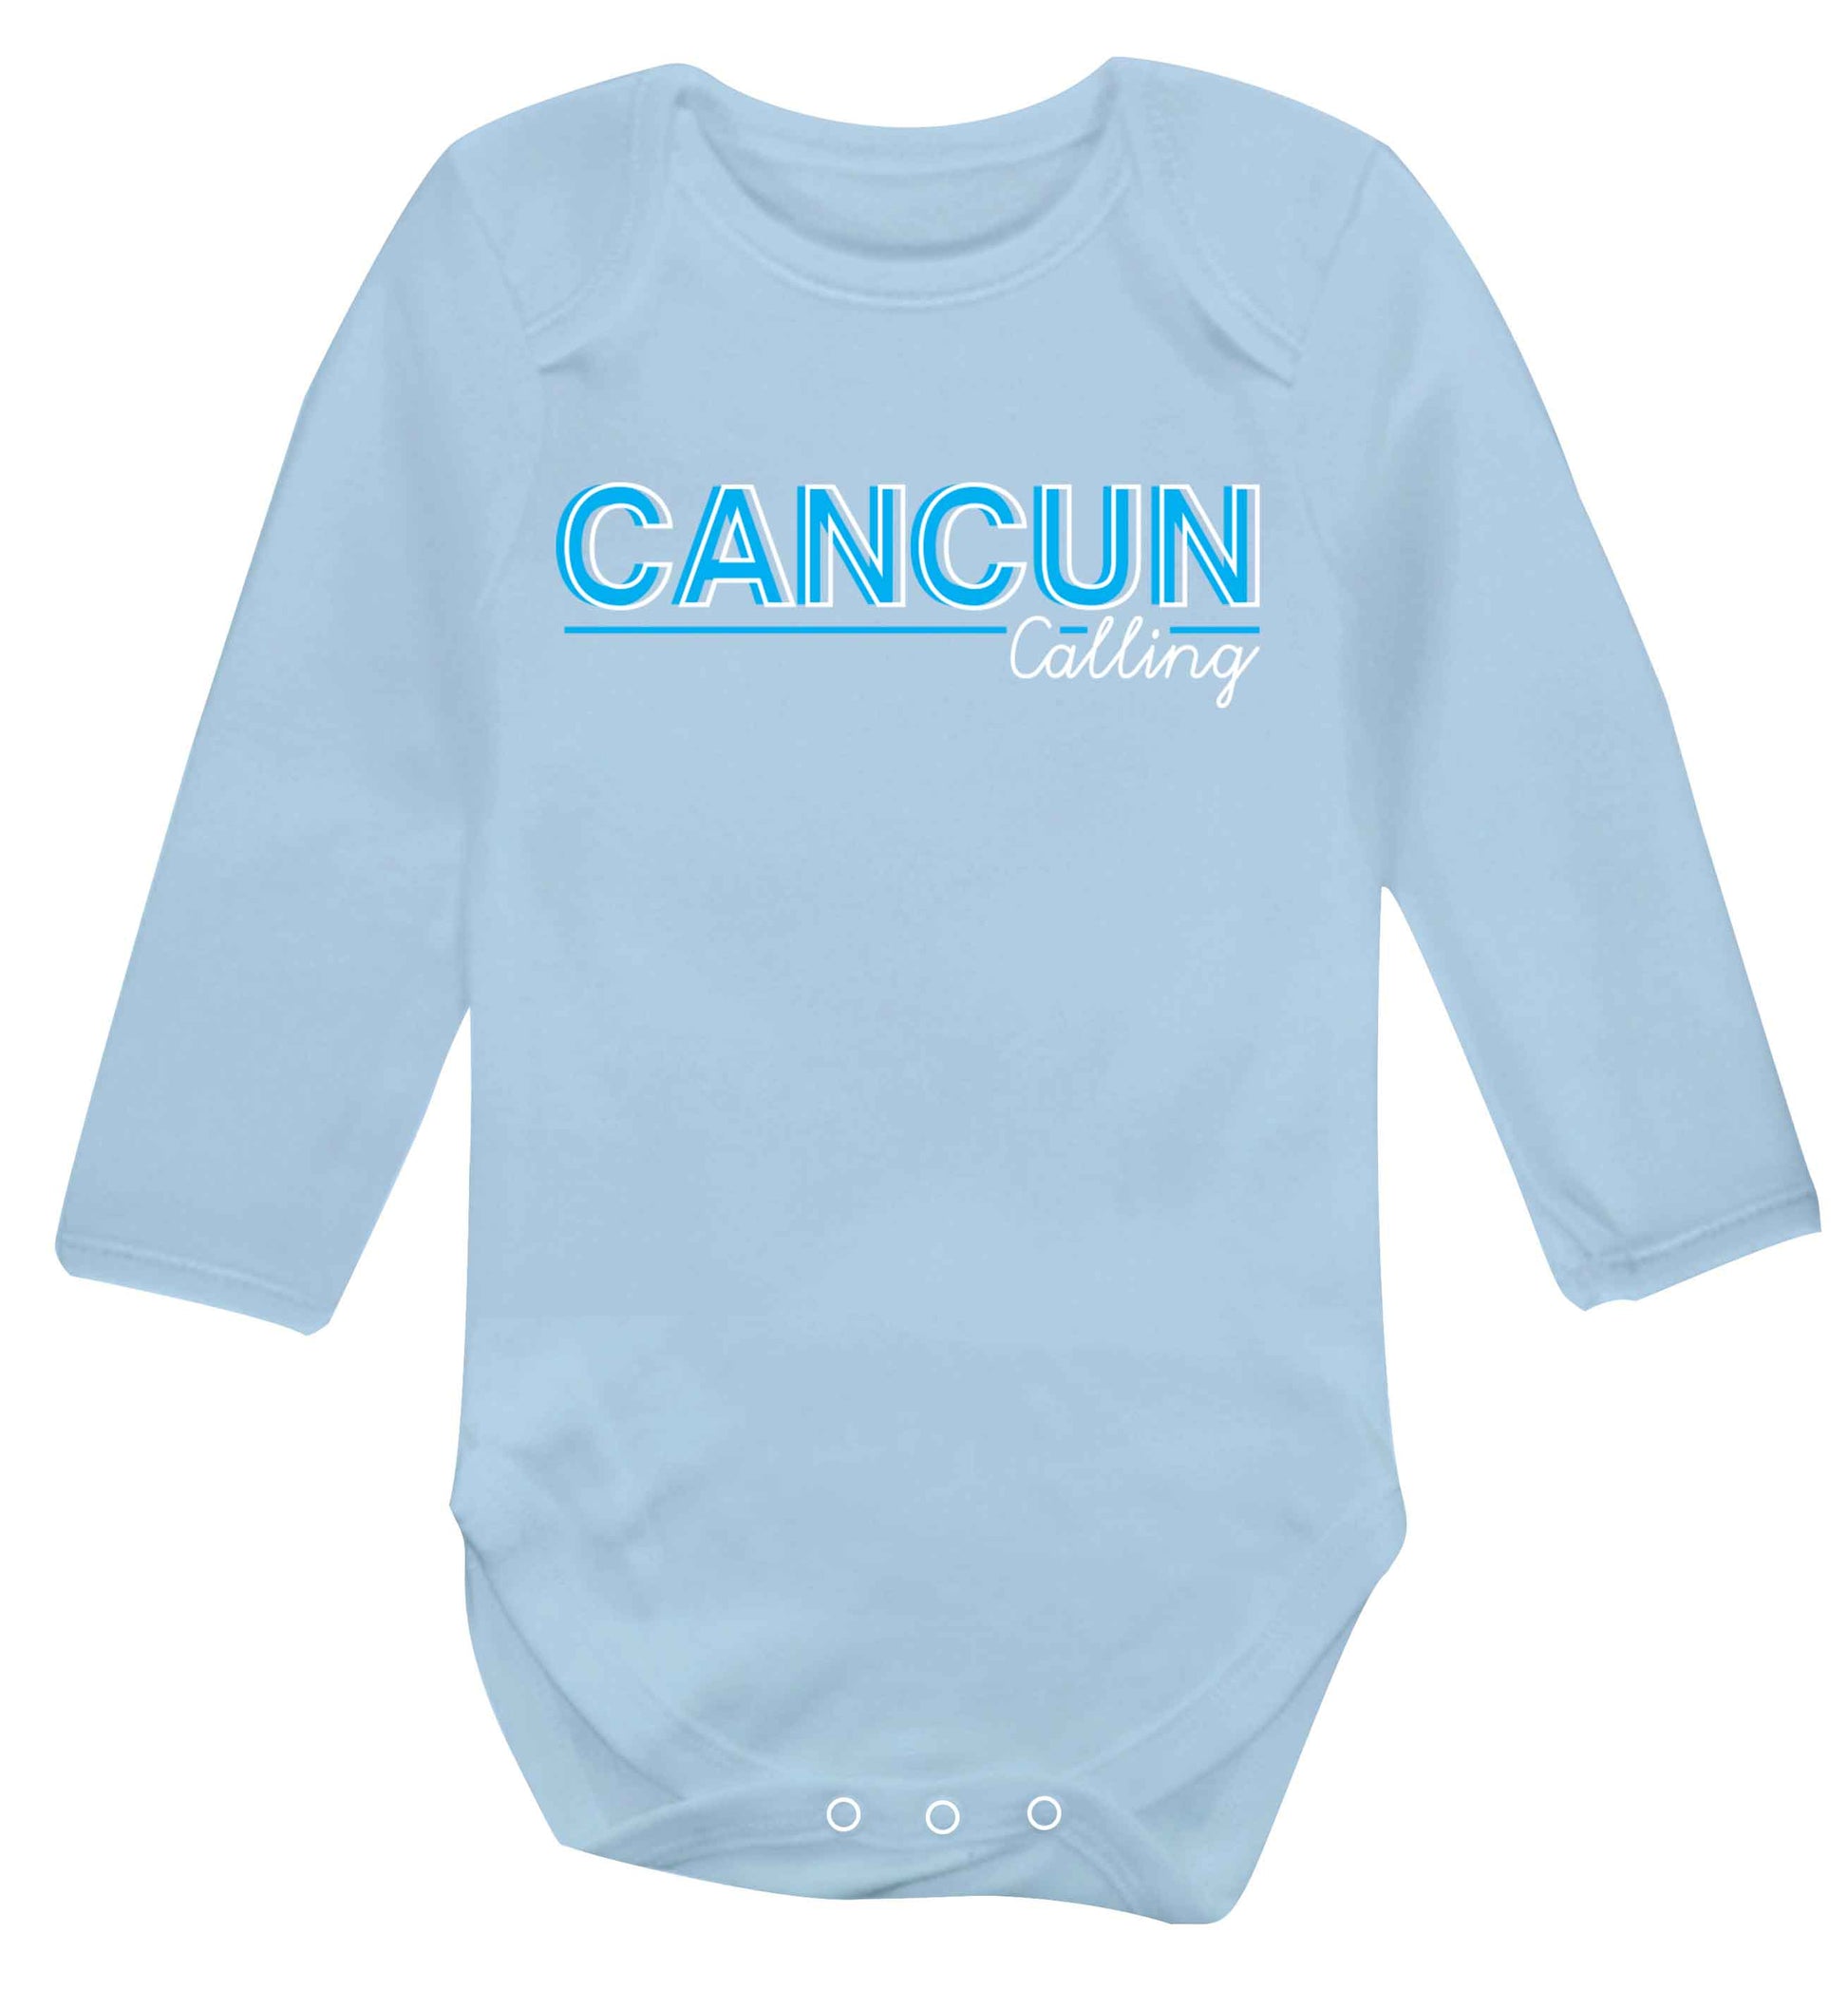 Cancun calling Baby Vest long sleeved pale blue 6-12 months